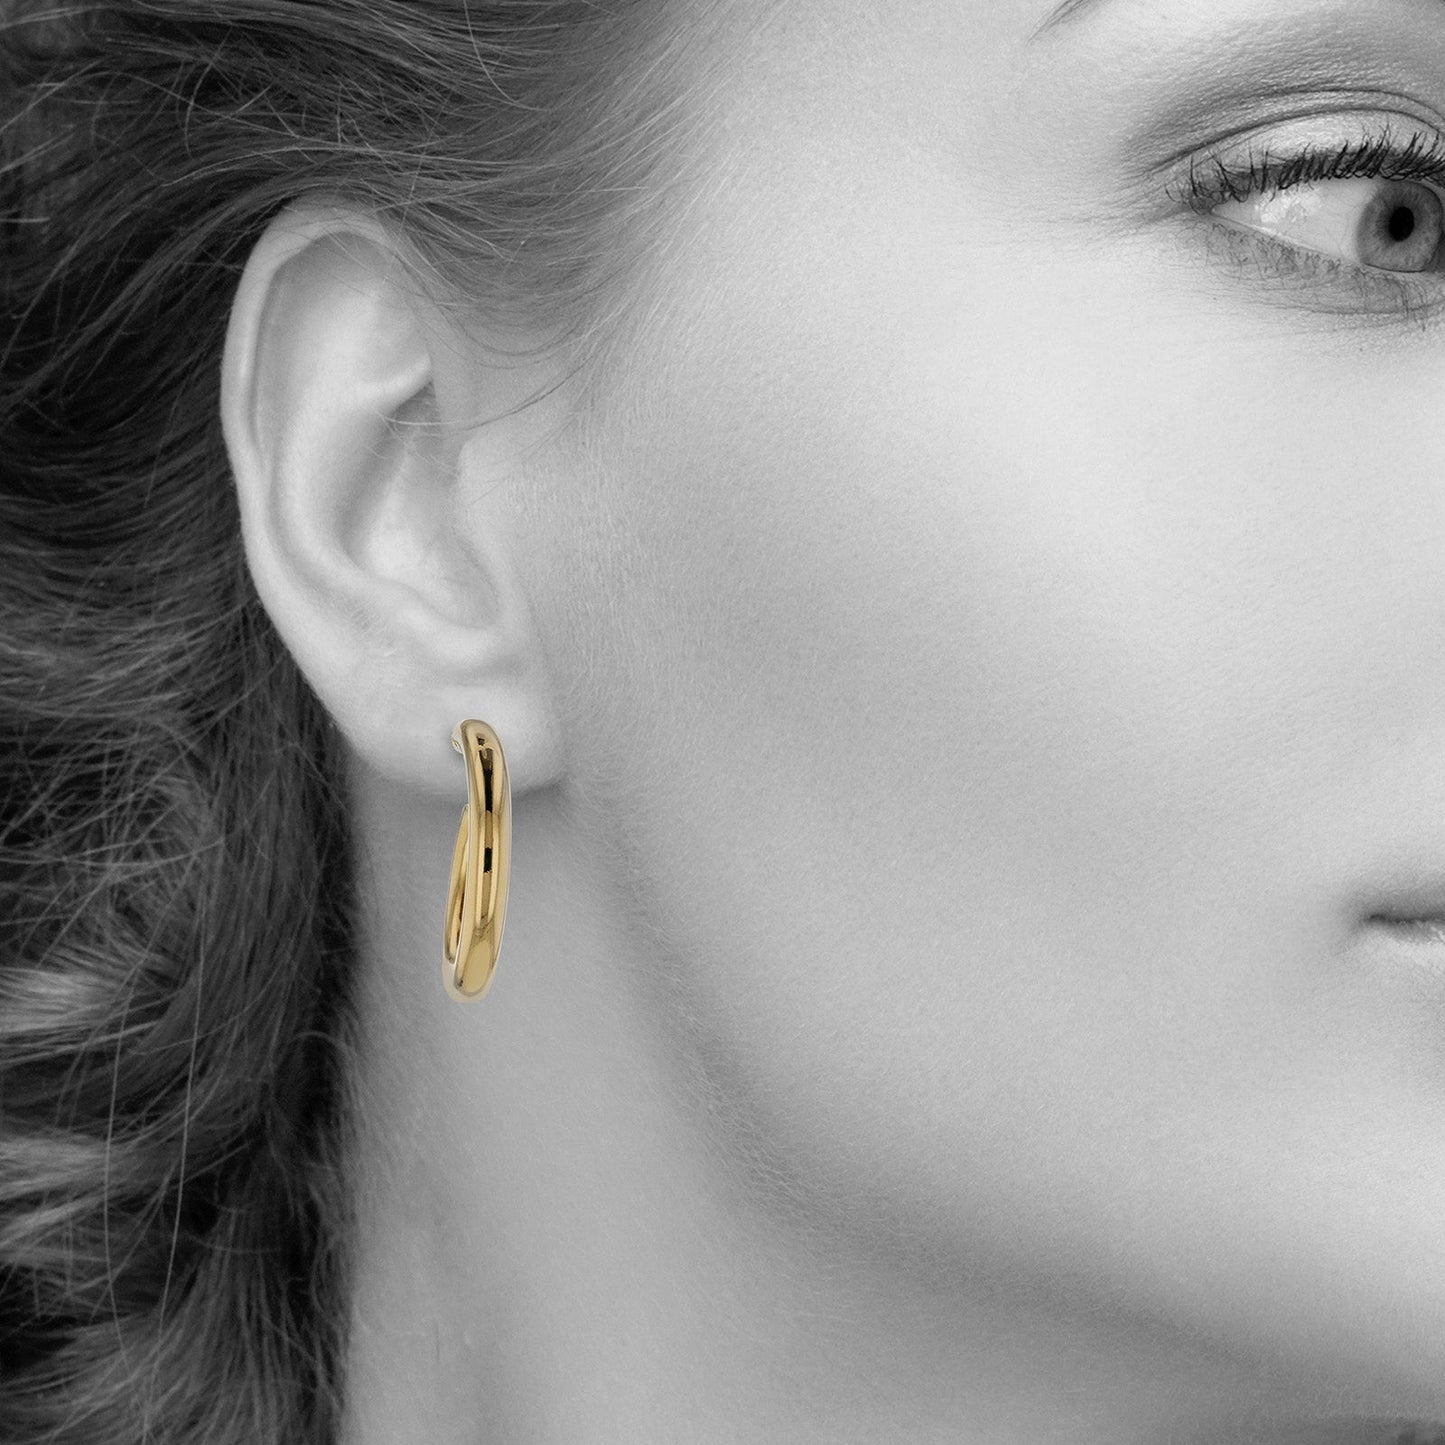 Open Tube Hoop Earrings in Yellow Gold Plated Sterling Silver